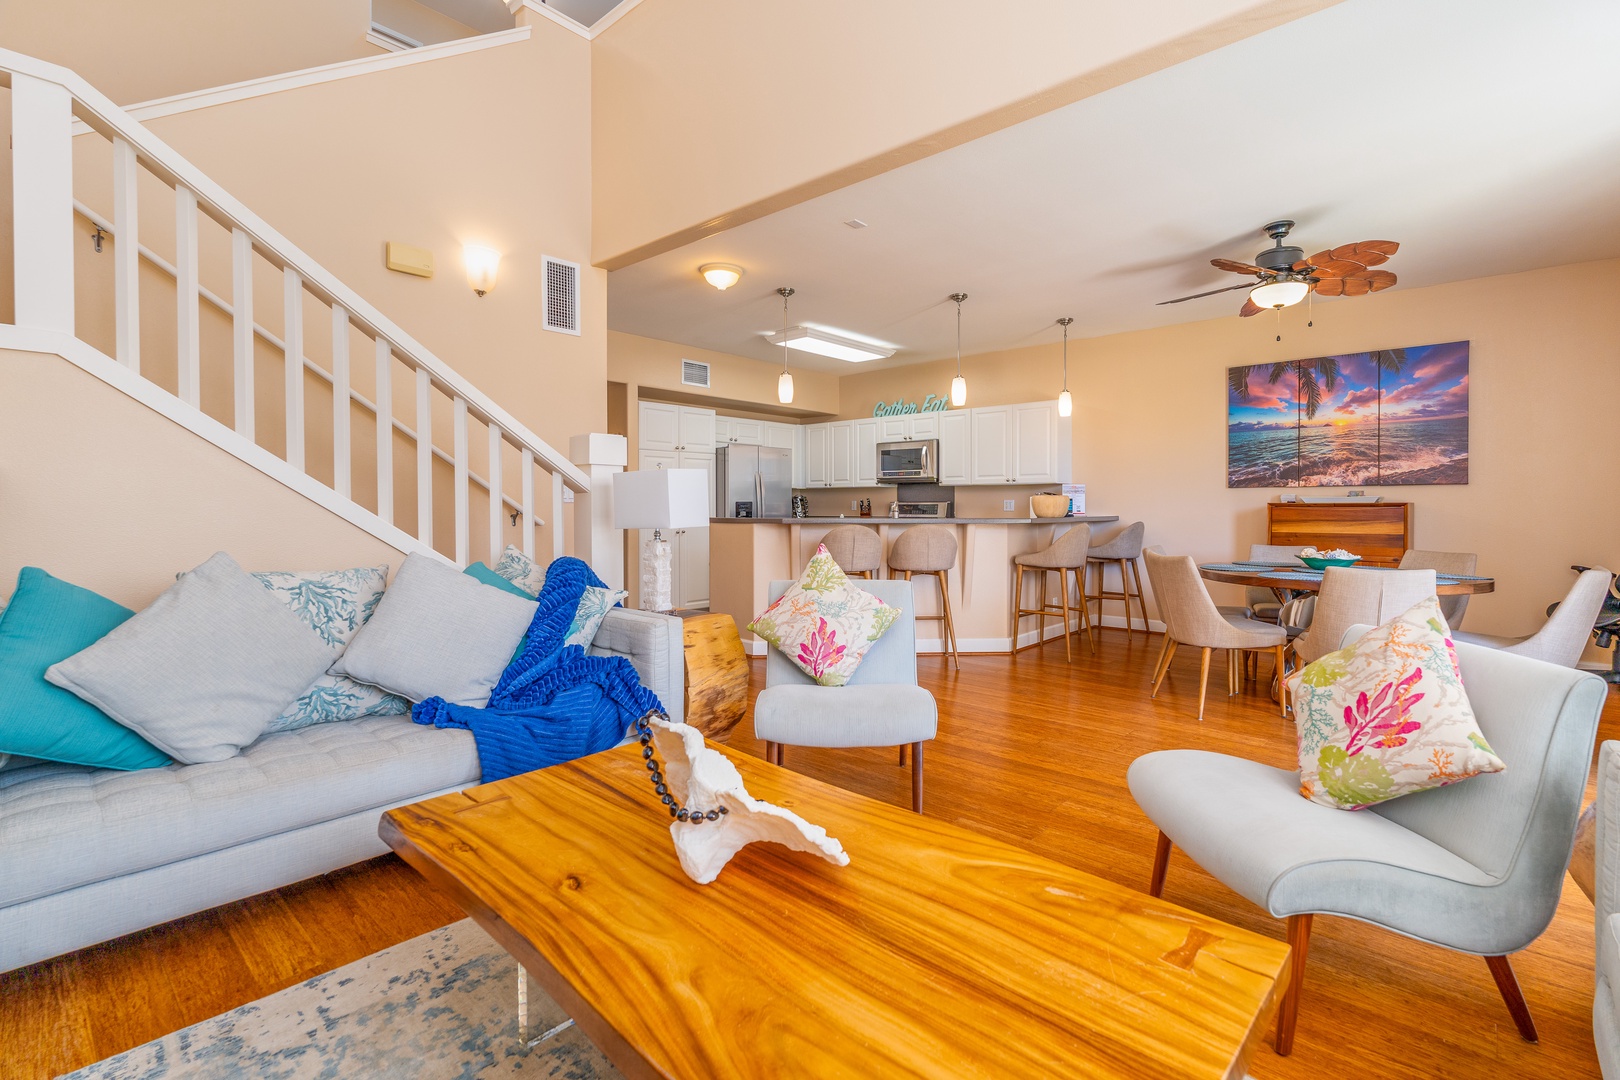 Kapolei Vacation Rentals, Ko Olina Kai 1081C - Converse with the chef and play a game of cards near the stairs.